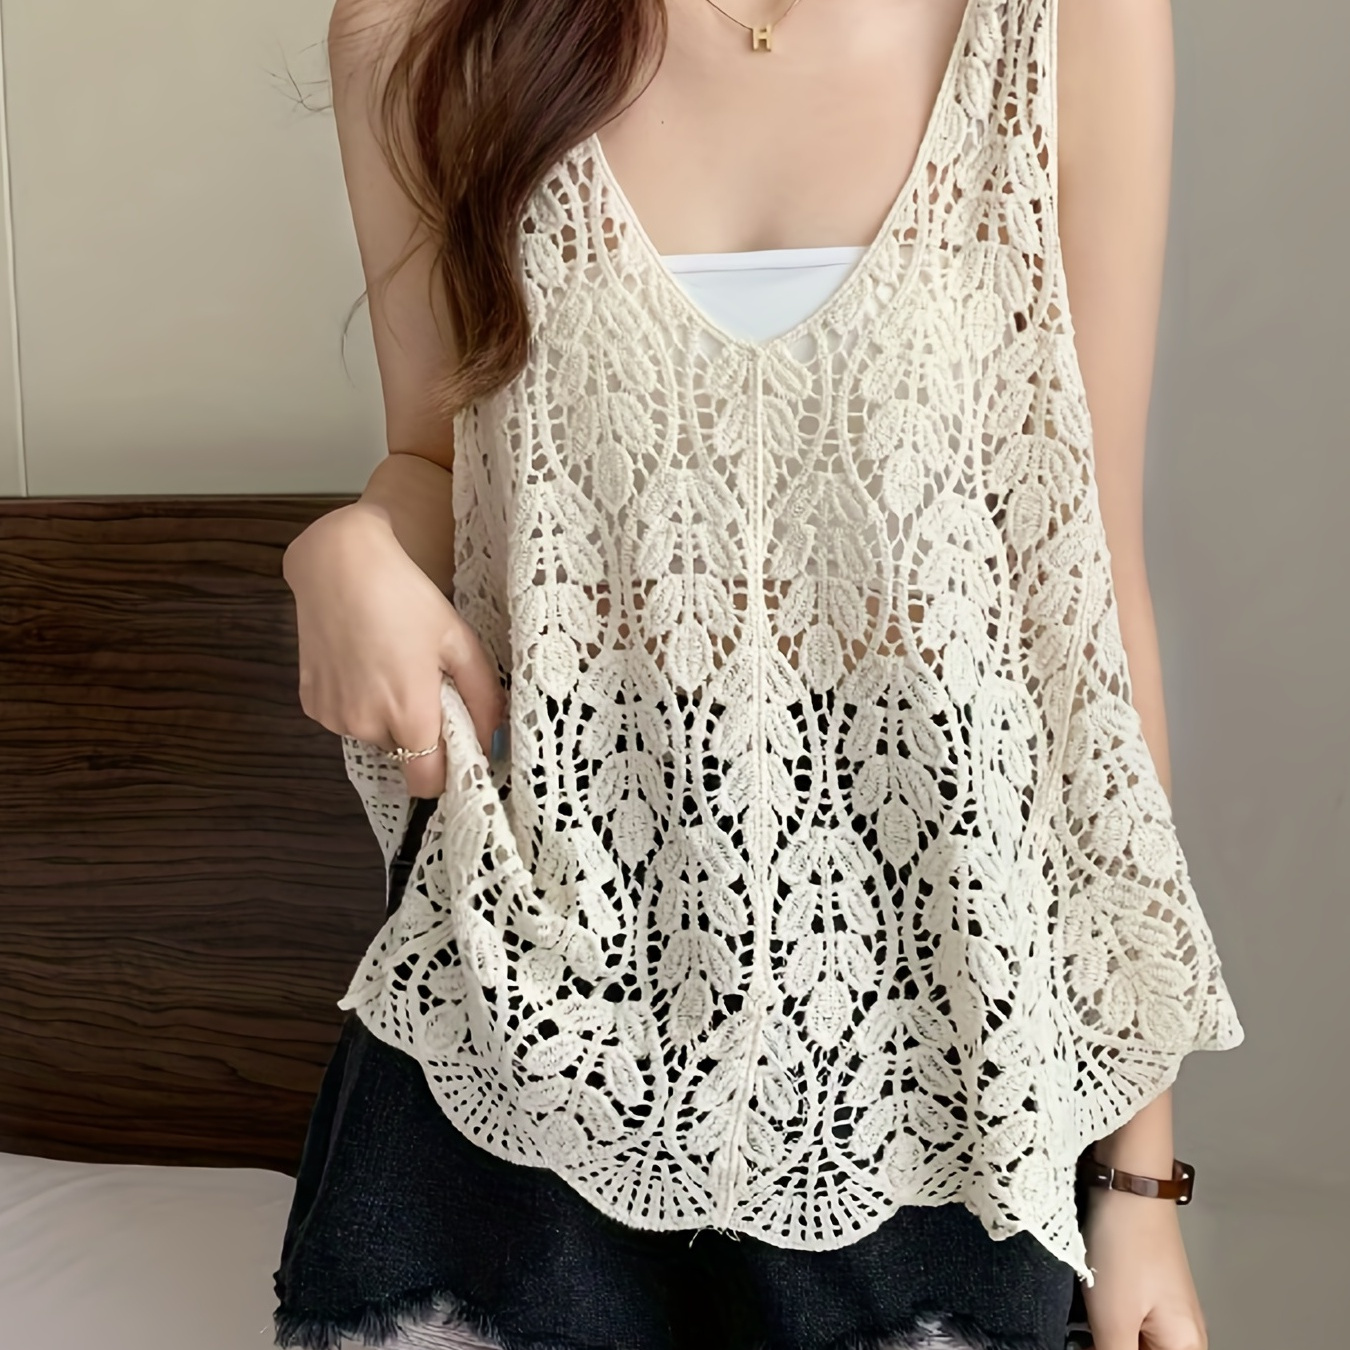 

Crochet Leaves Pattern Knitted Top, Casual Beach Wear Sleeveless Summer Top, Women's Clothing